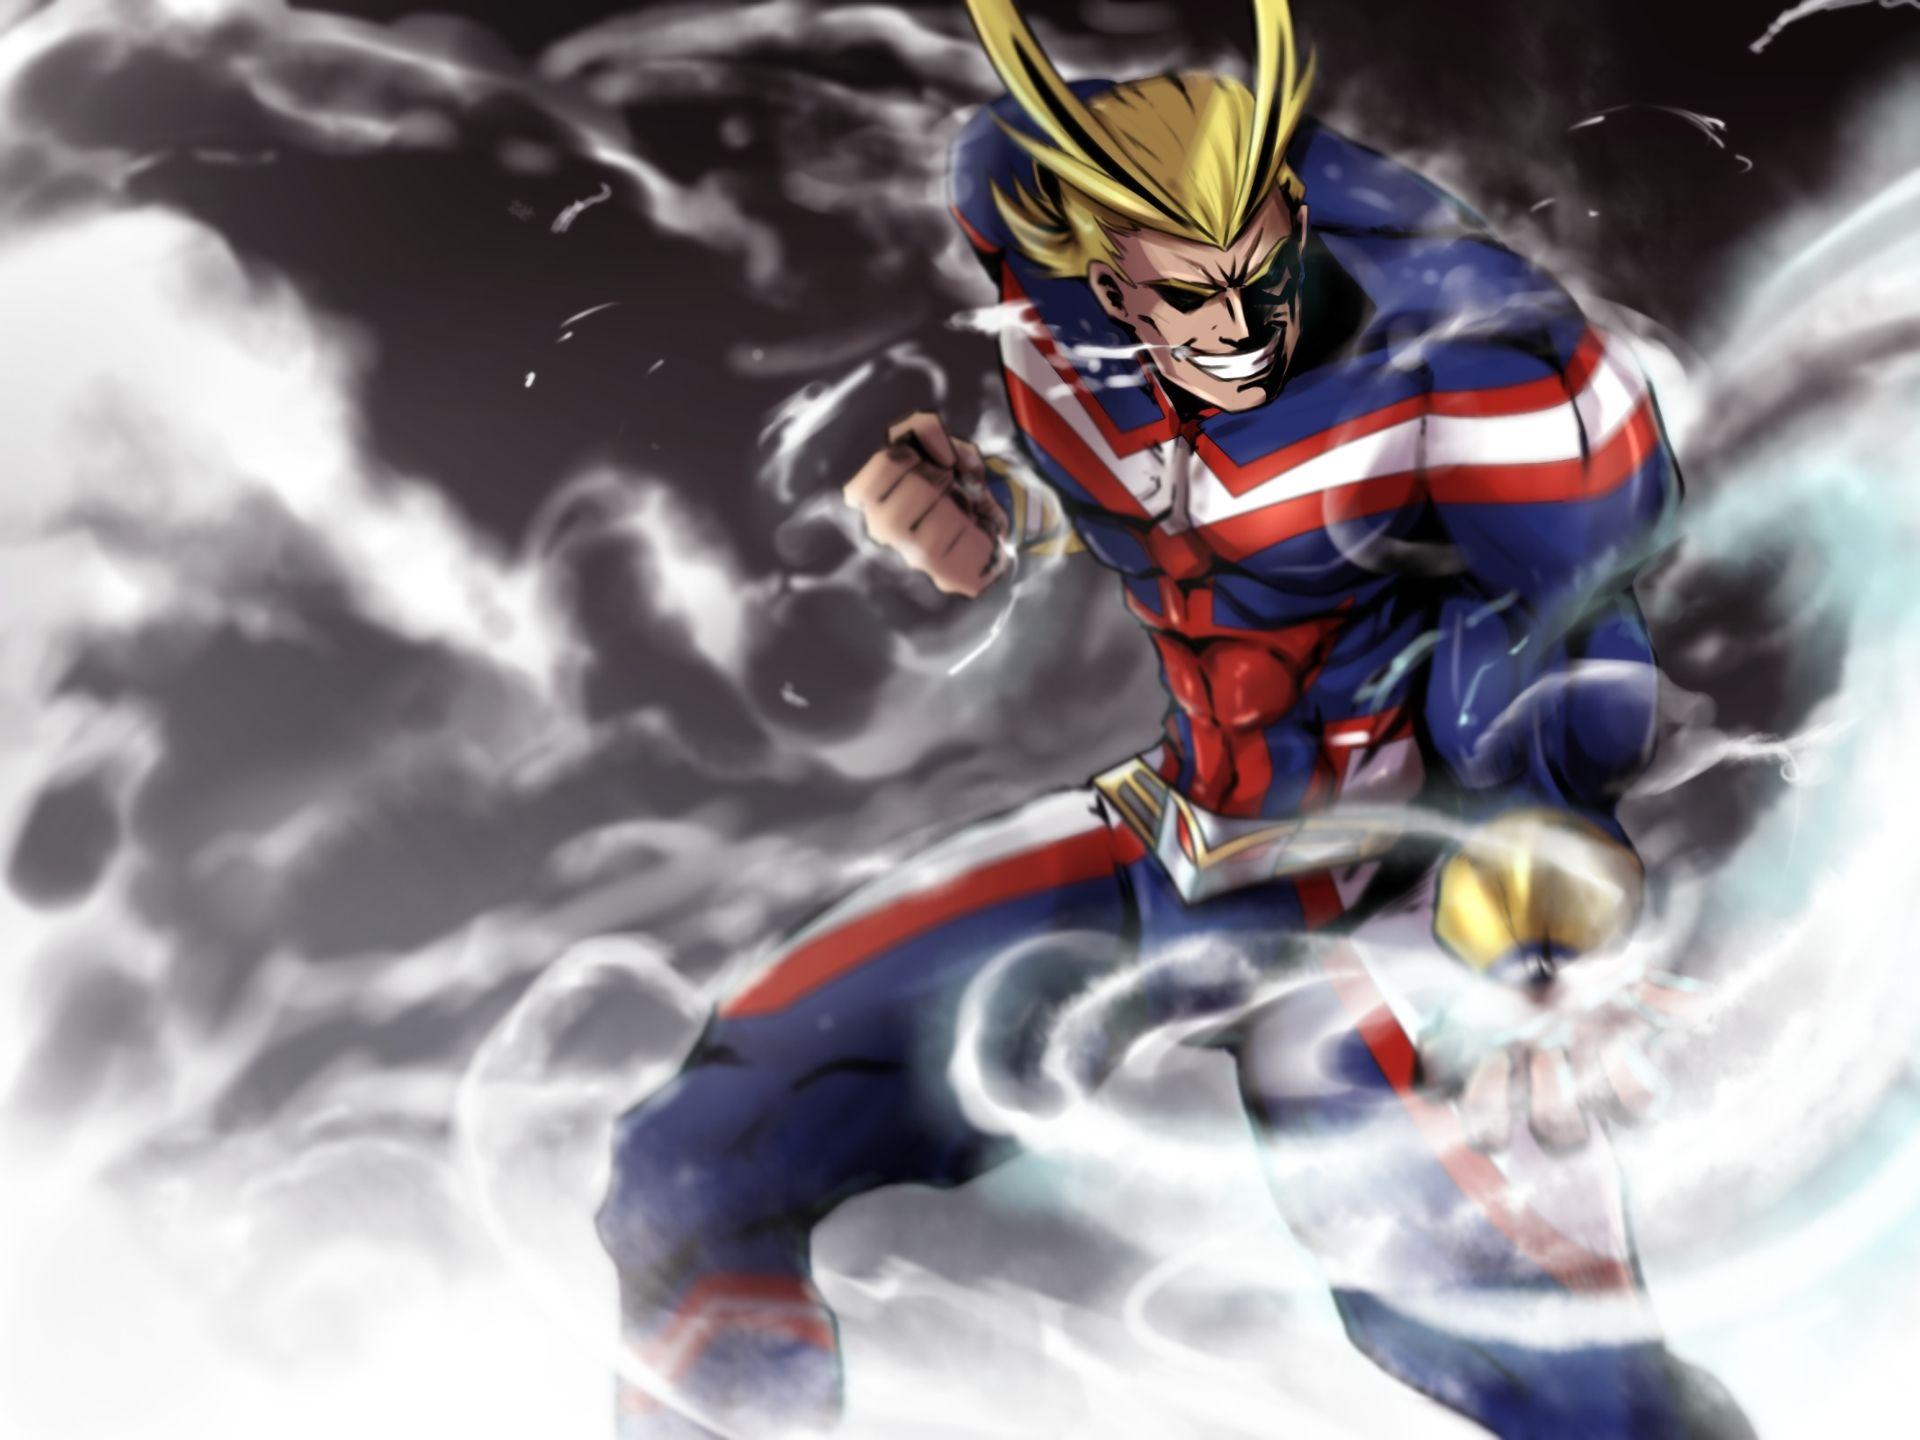 Awesome My Hero Academia Wallpaper 1920×1080 Download. Wallpaper HD